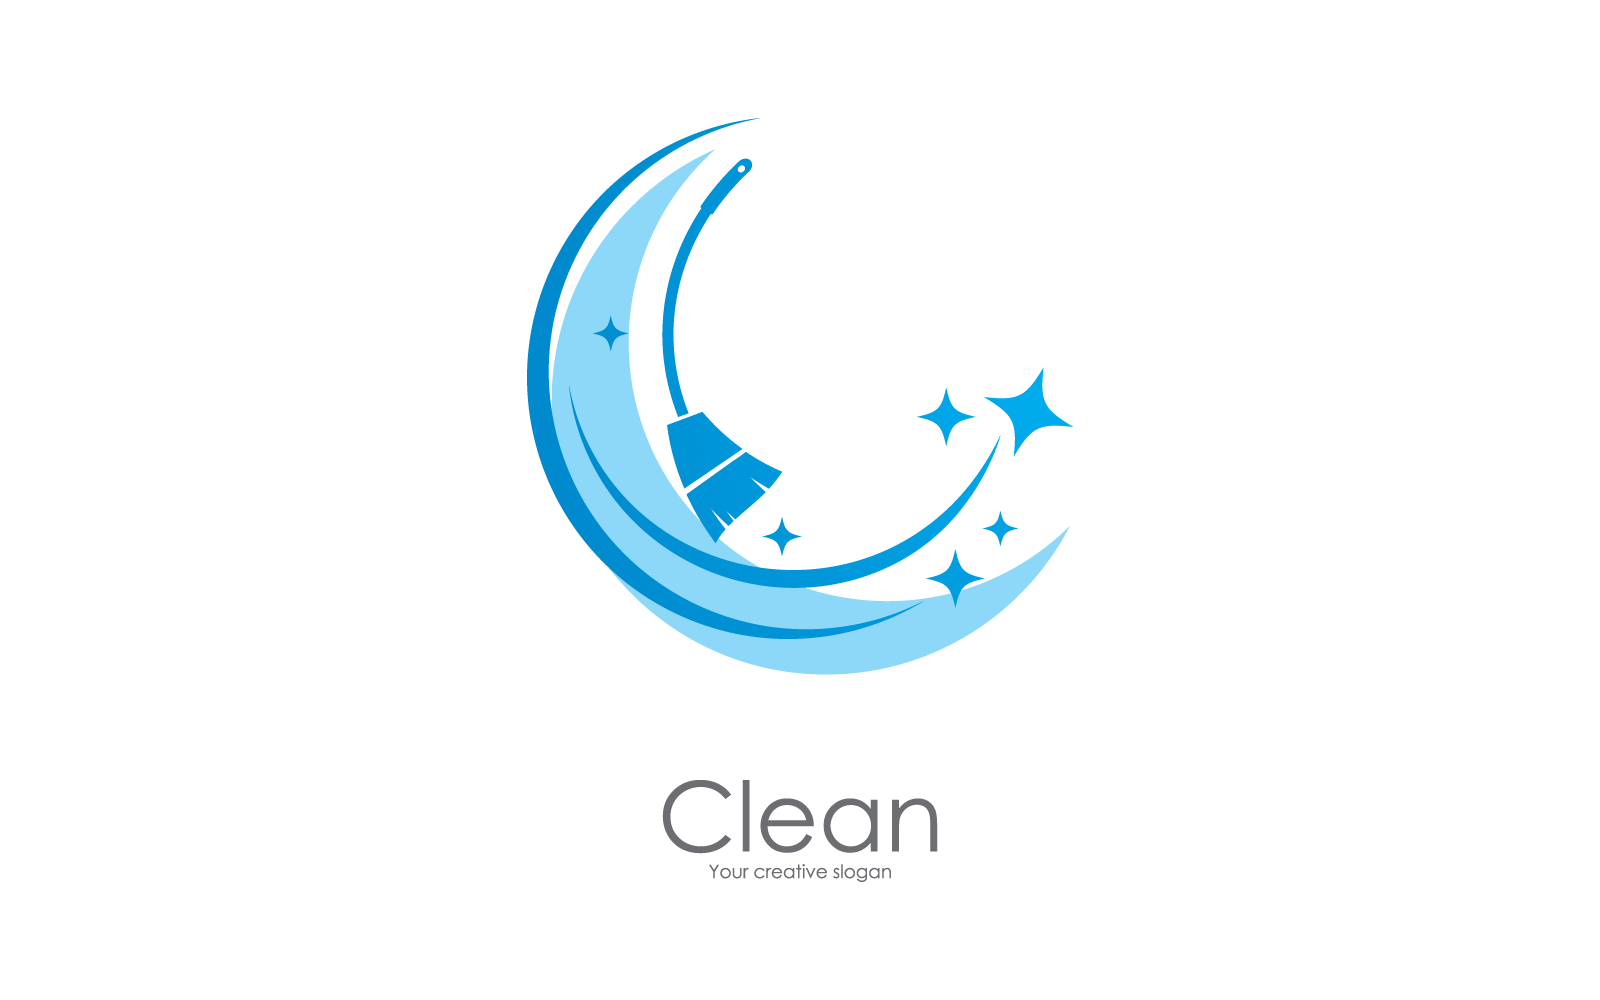 Cleaning logo and symbol design template